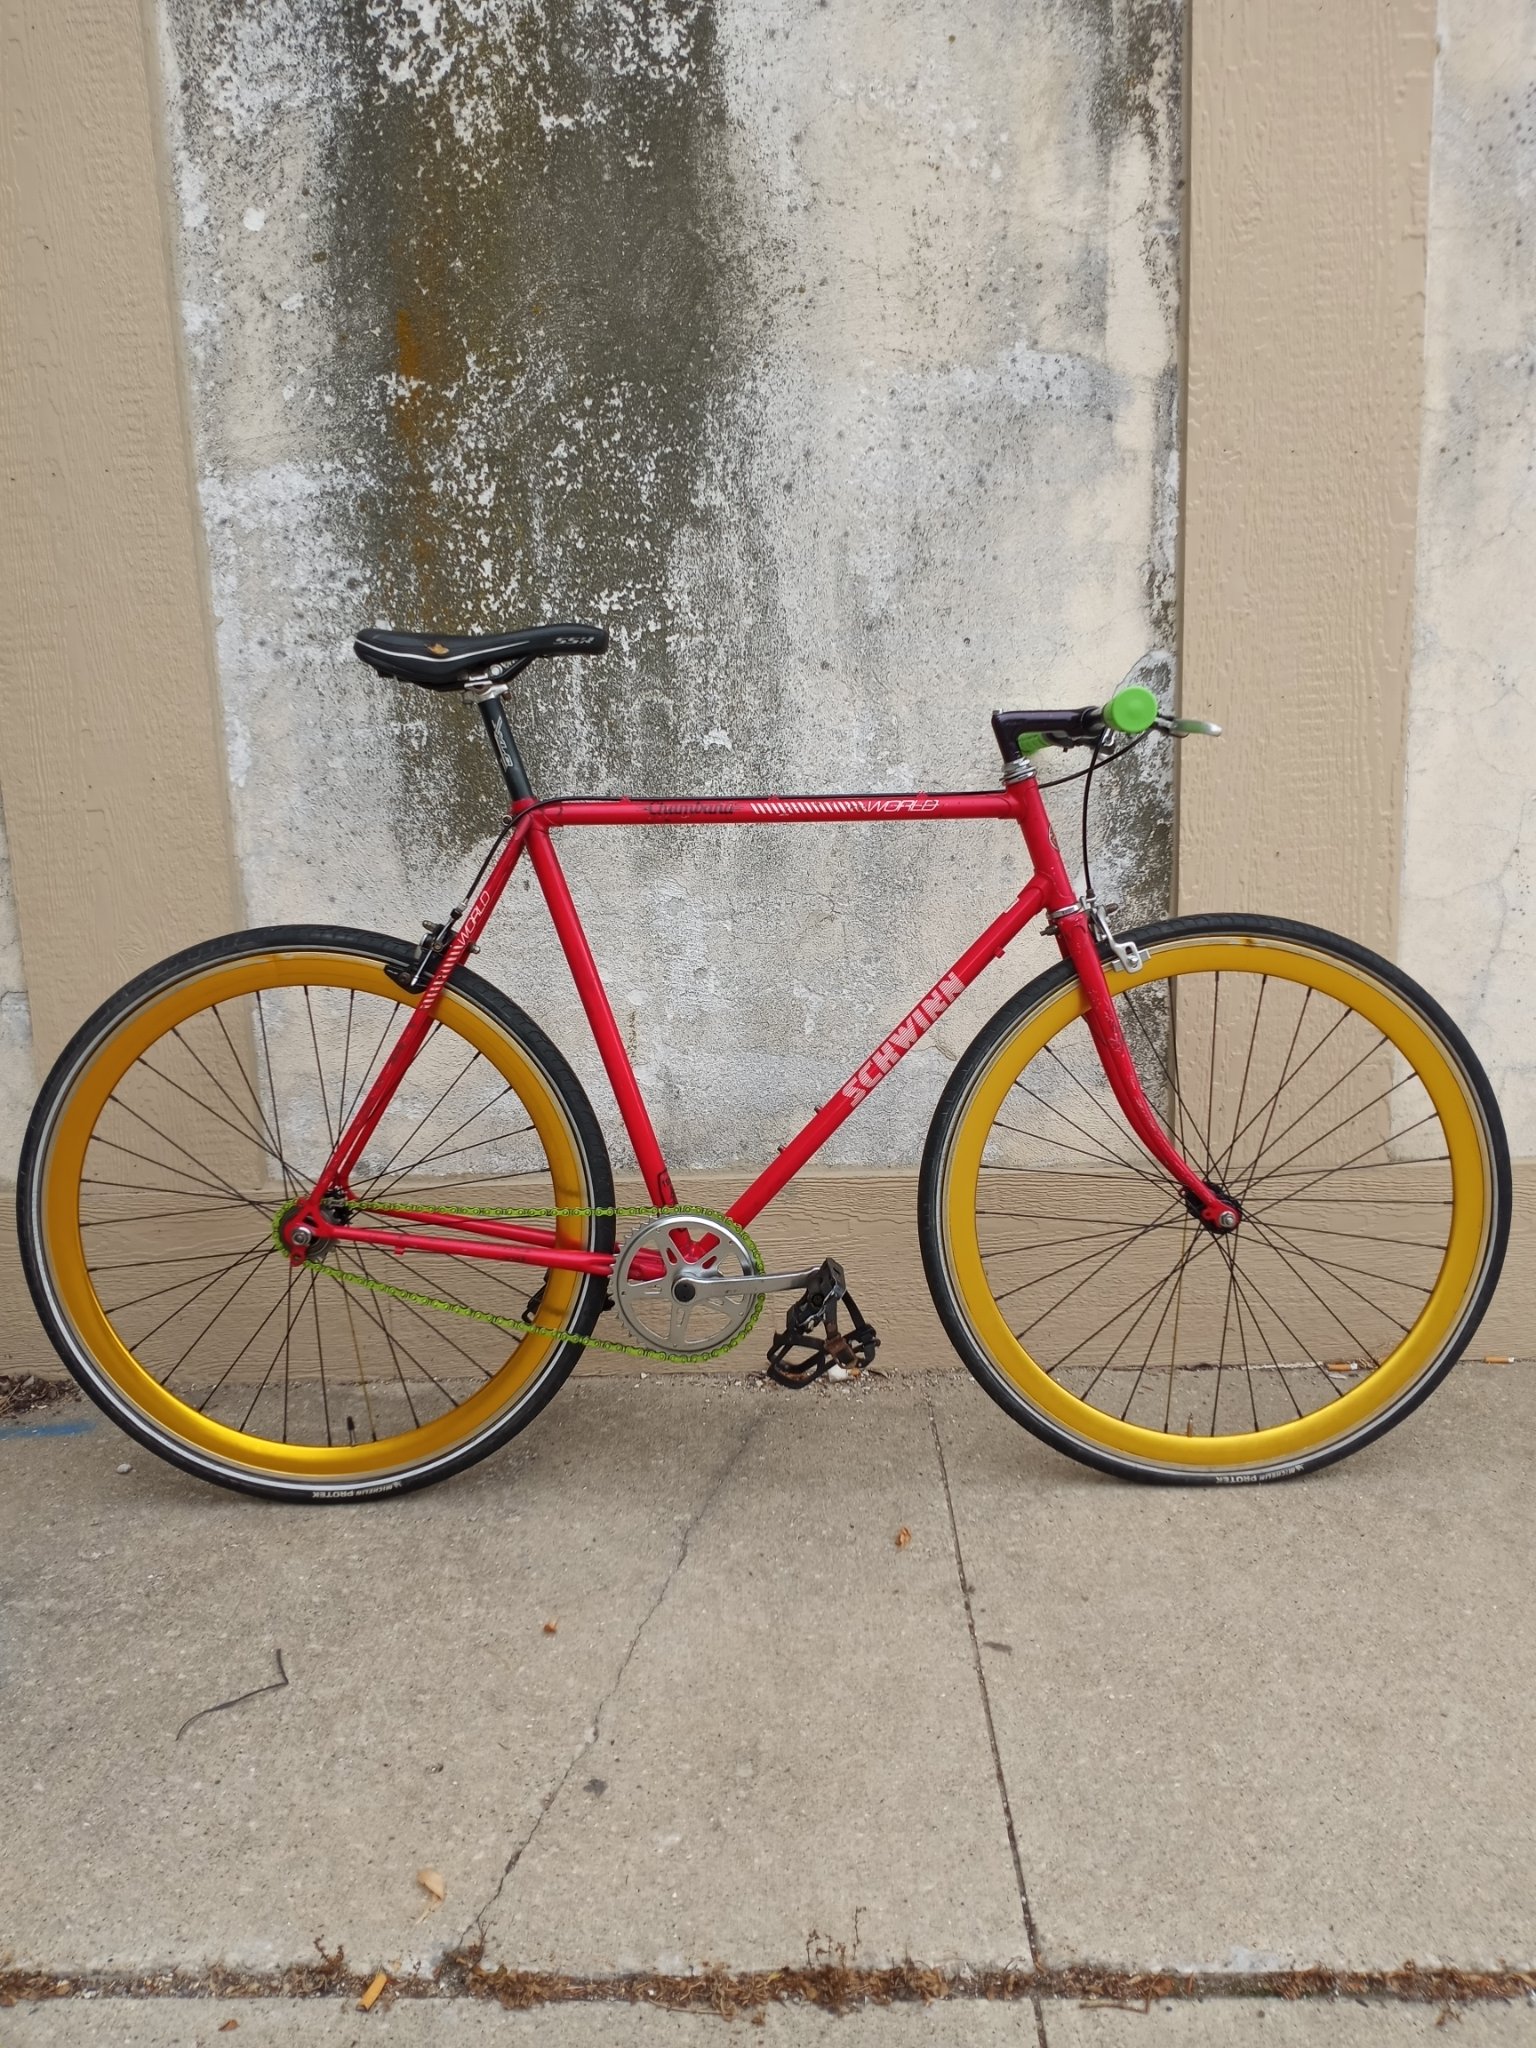 A red bicycle with yellow wheels and black tires is leaning on a pale concrete wall, on a concrete sidewalk.